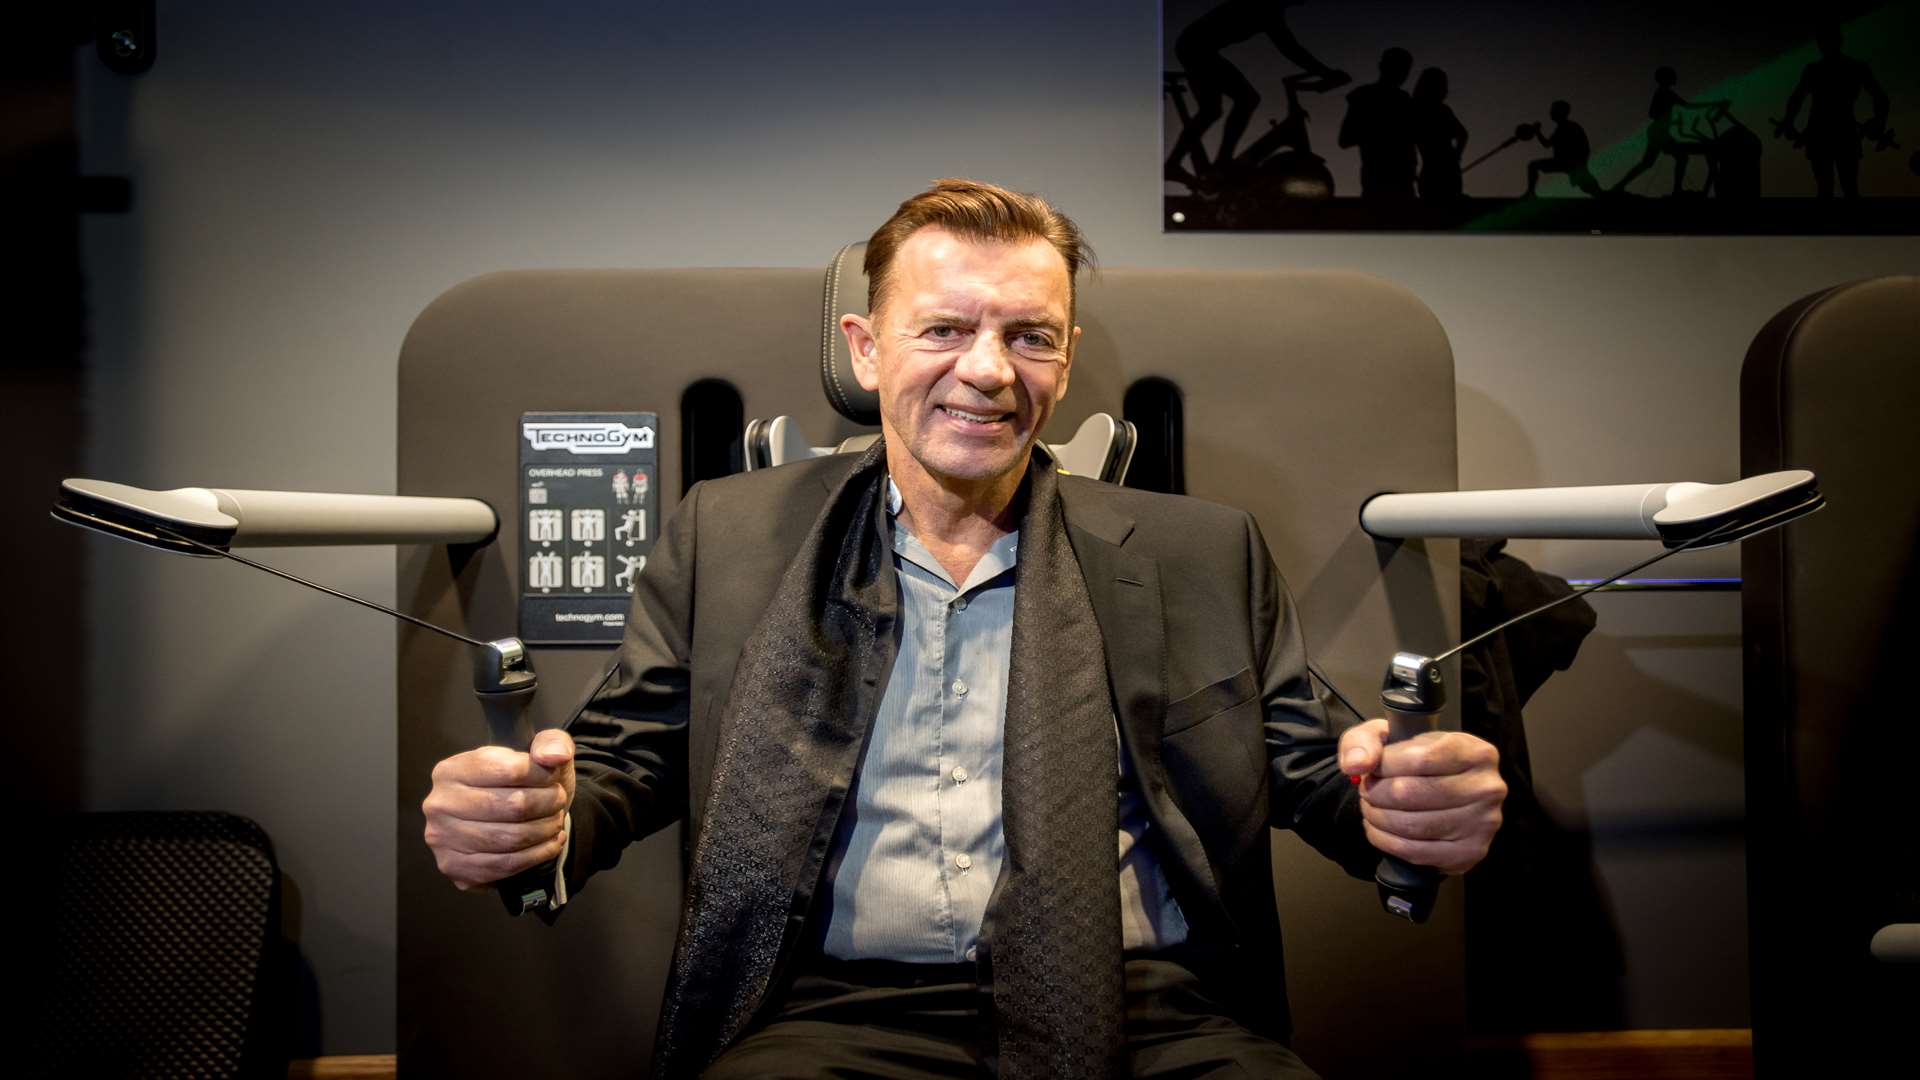 Former Dragons' Den star Duncan Bannatyne founded his health club business in 1996